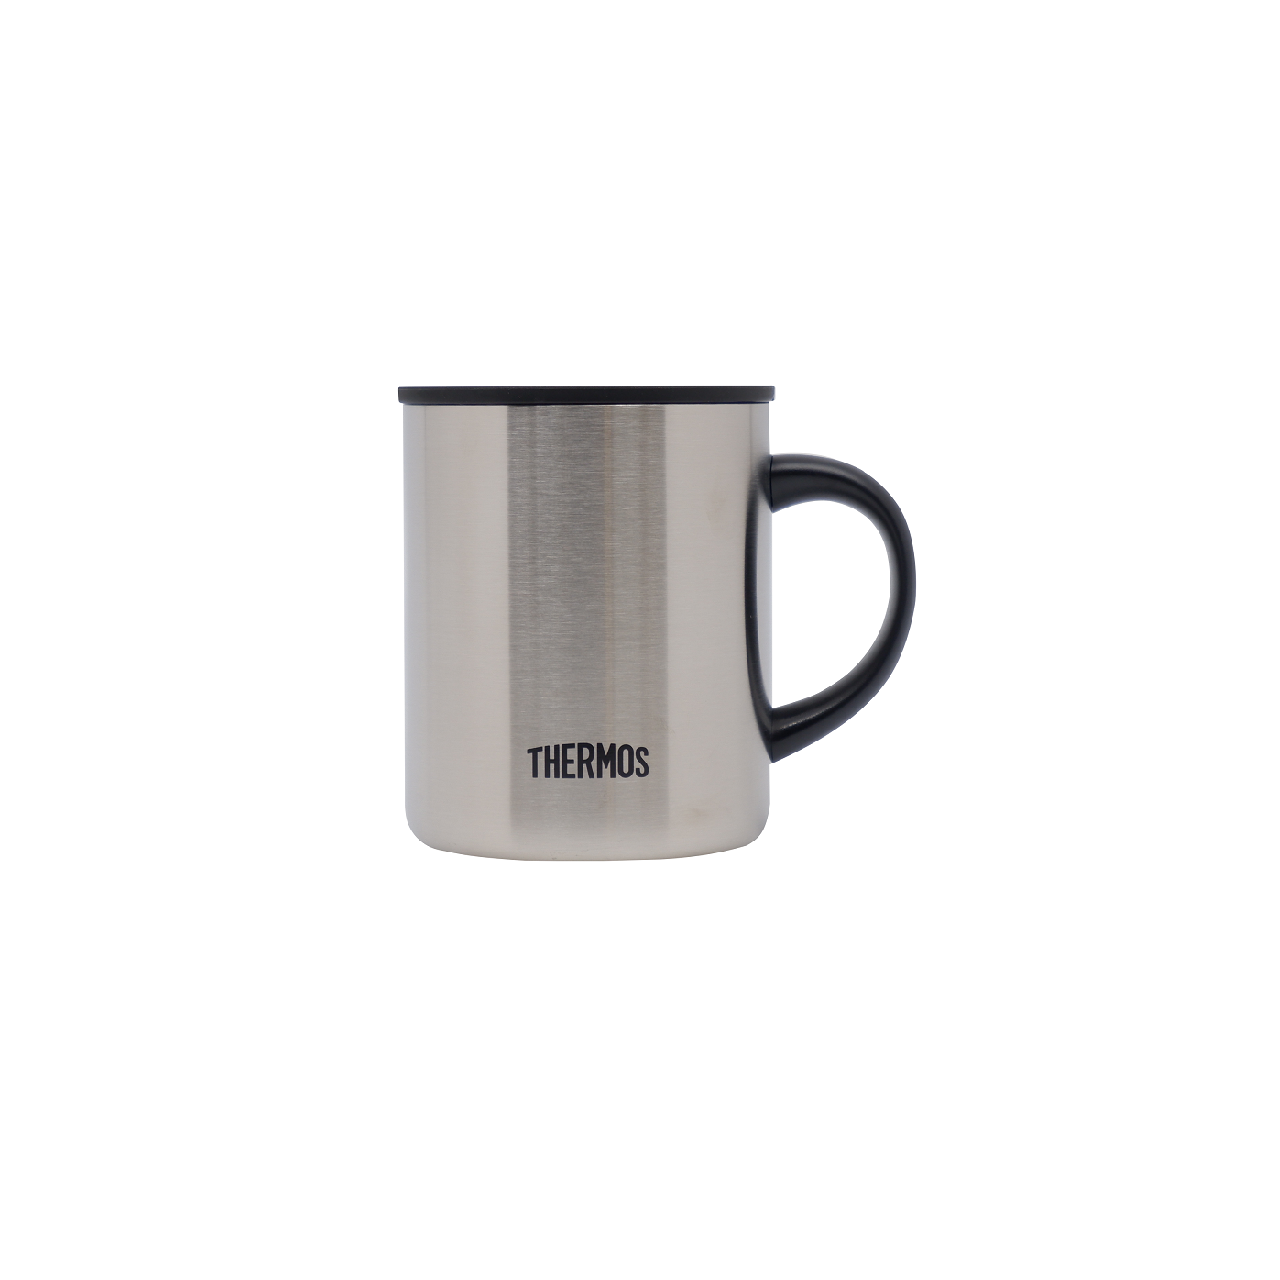 https://www.thermos.com.hk/wp-content/uploads/2020/10/JDG-350-S.png